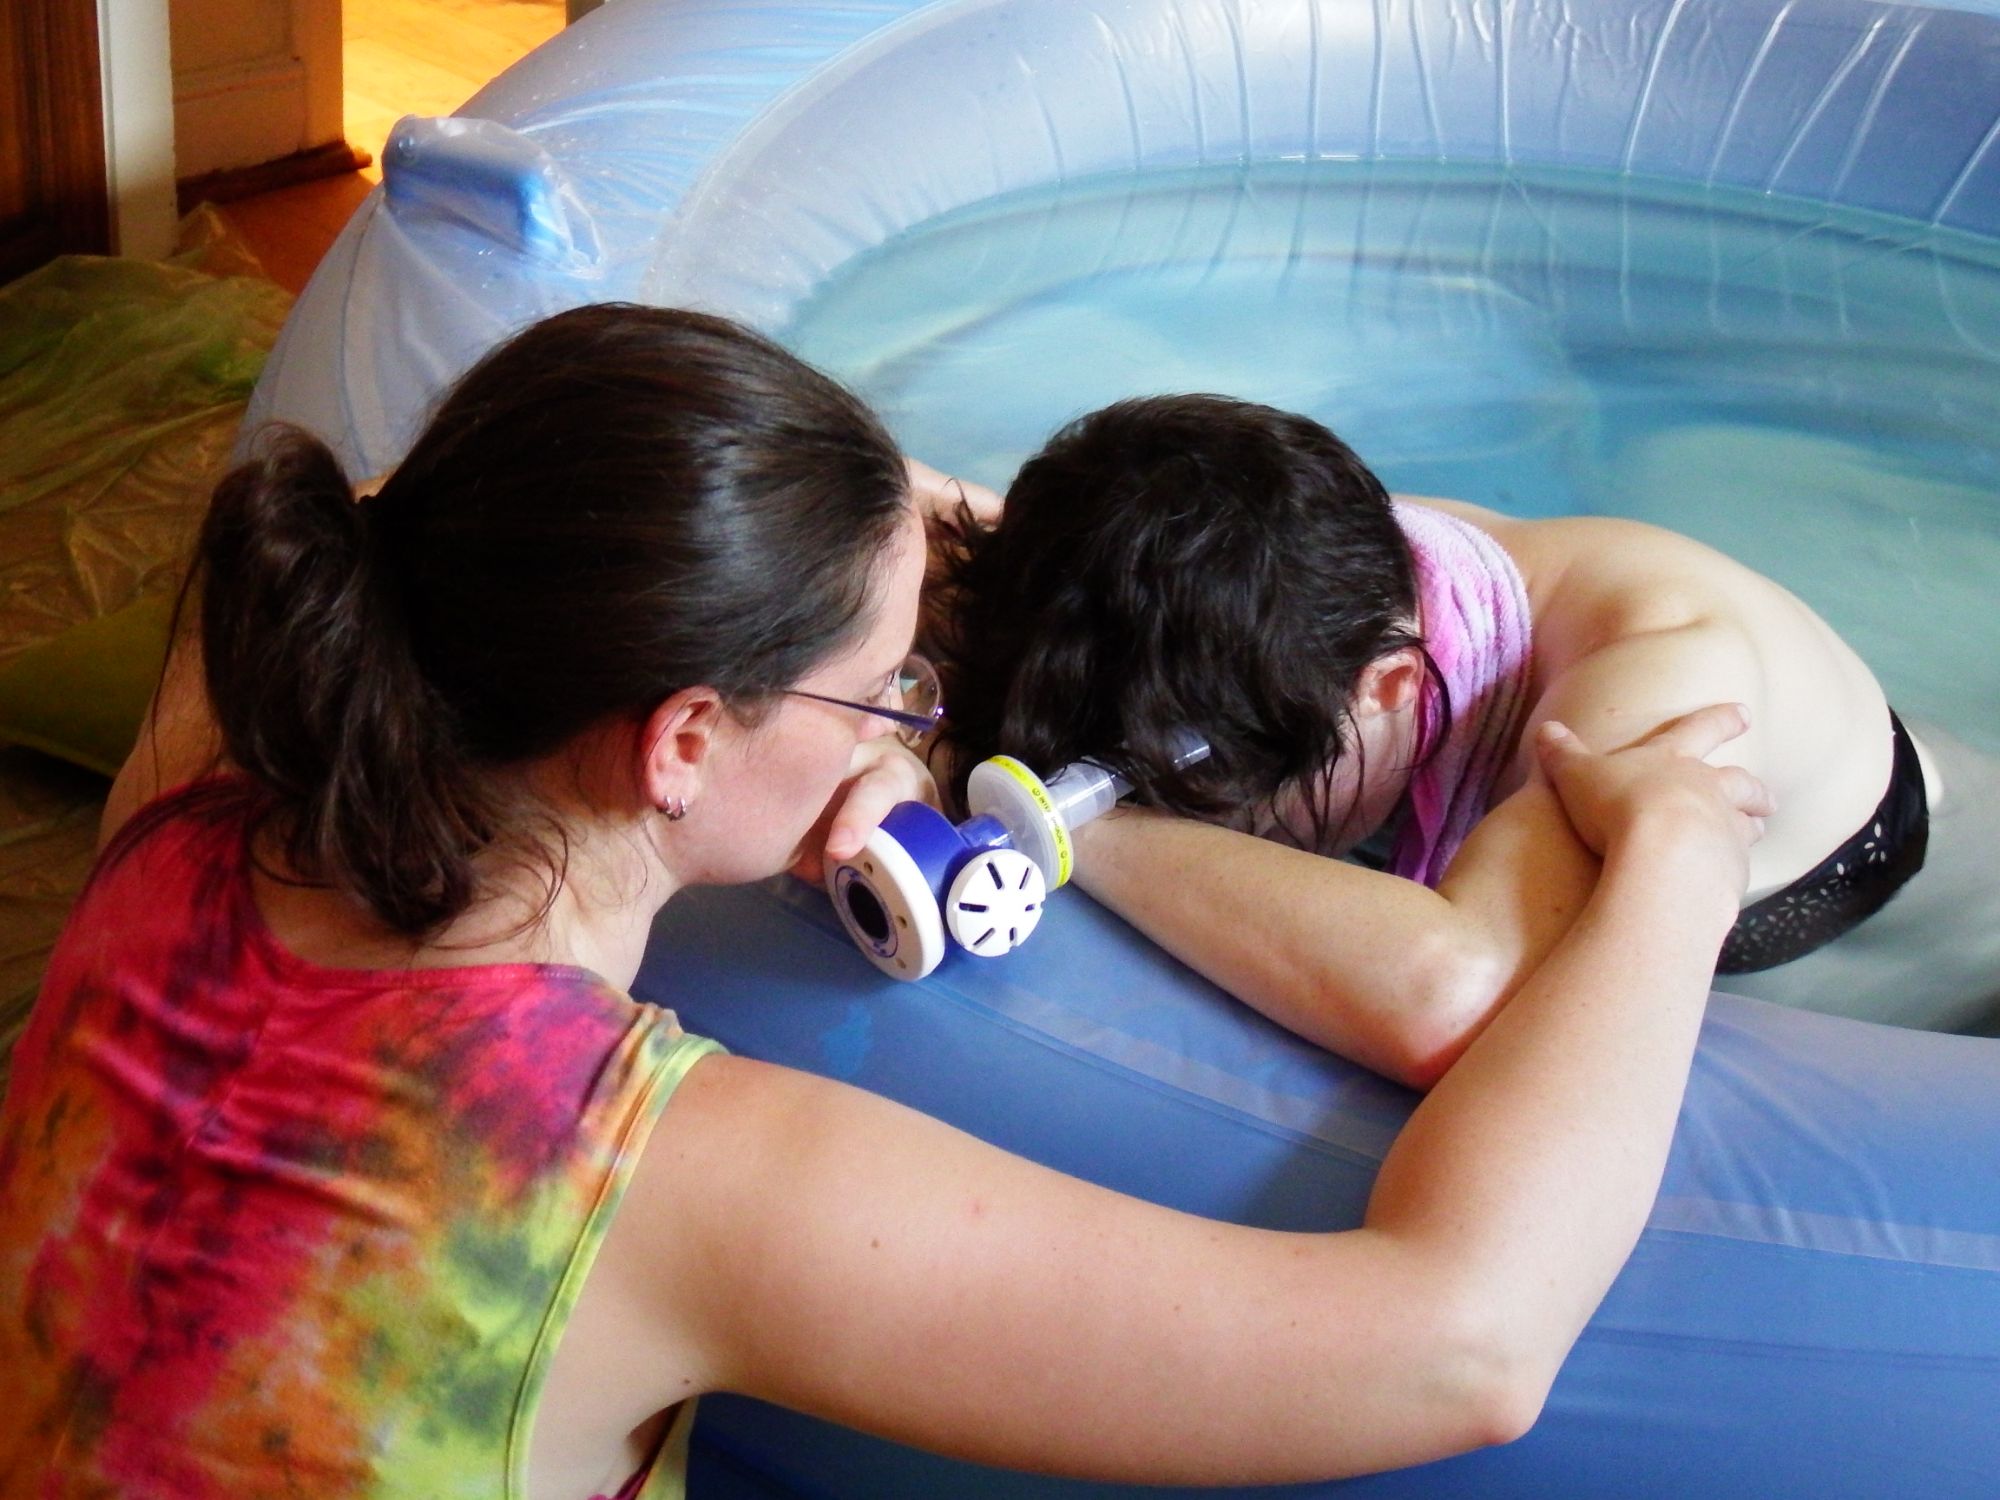 A woman leaning on the side of the birth pool, her arms folded and her head resting forward on them. She is holding gas & air in her hand. Caz is dressed in a rainbow top and has her hands rested lightly on the woman's upper arms in comfort.